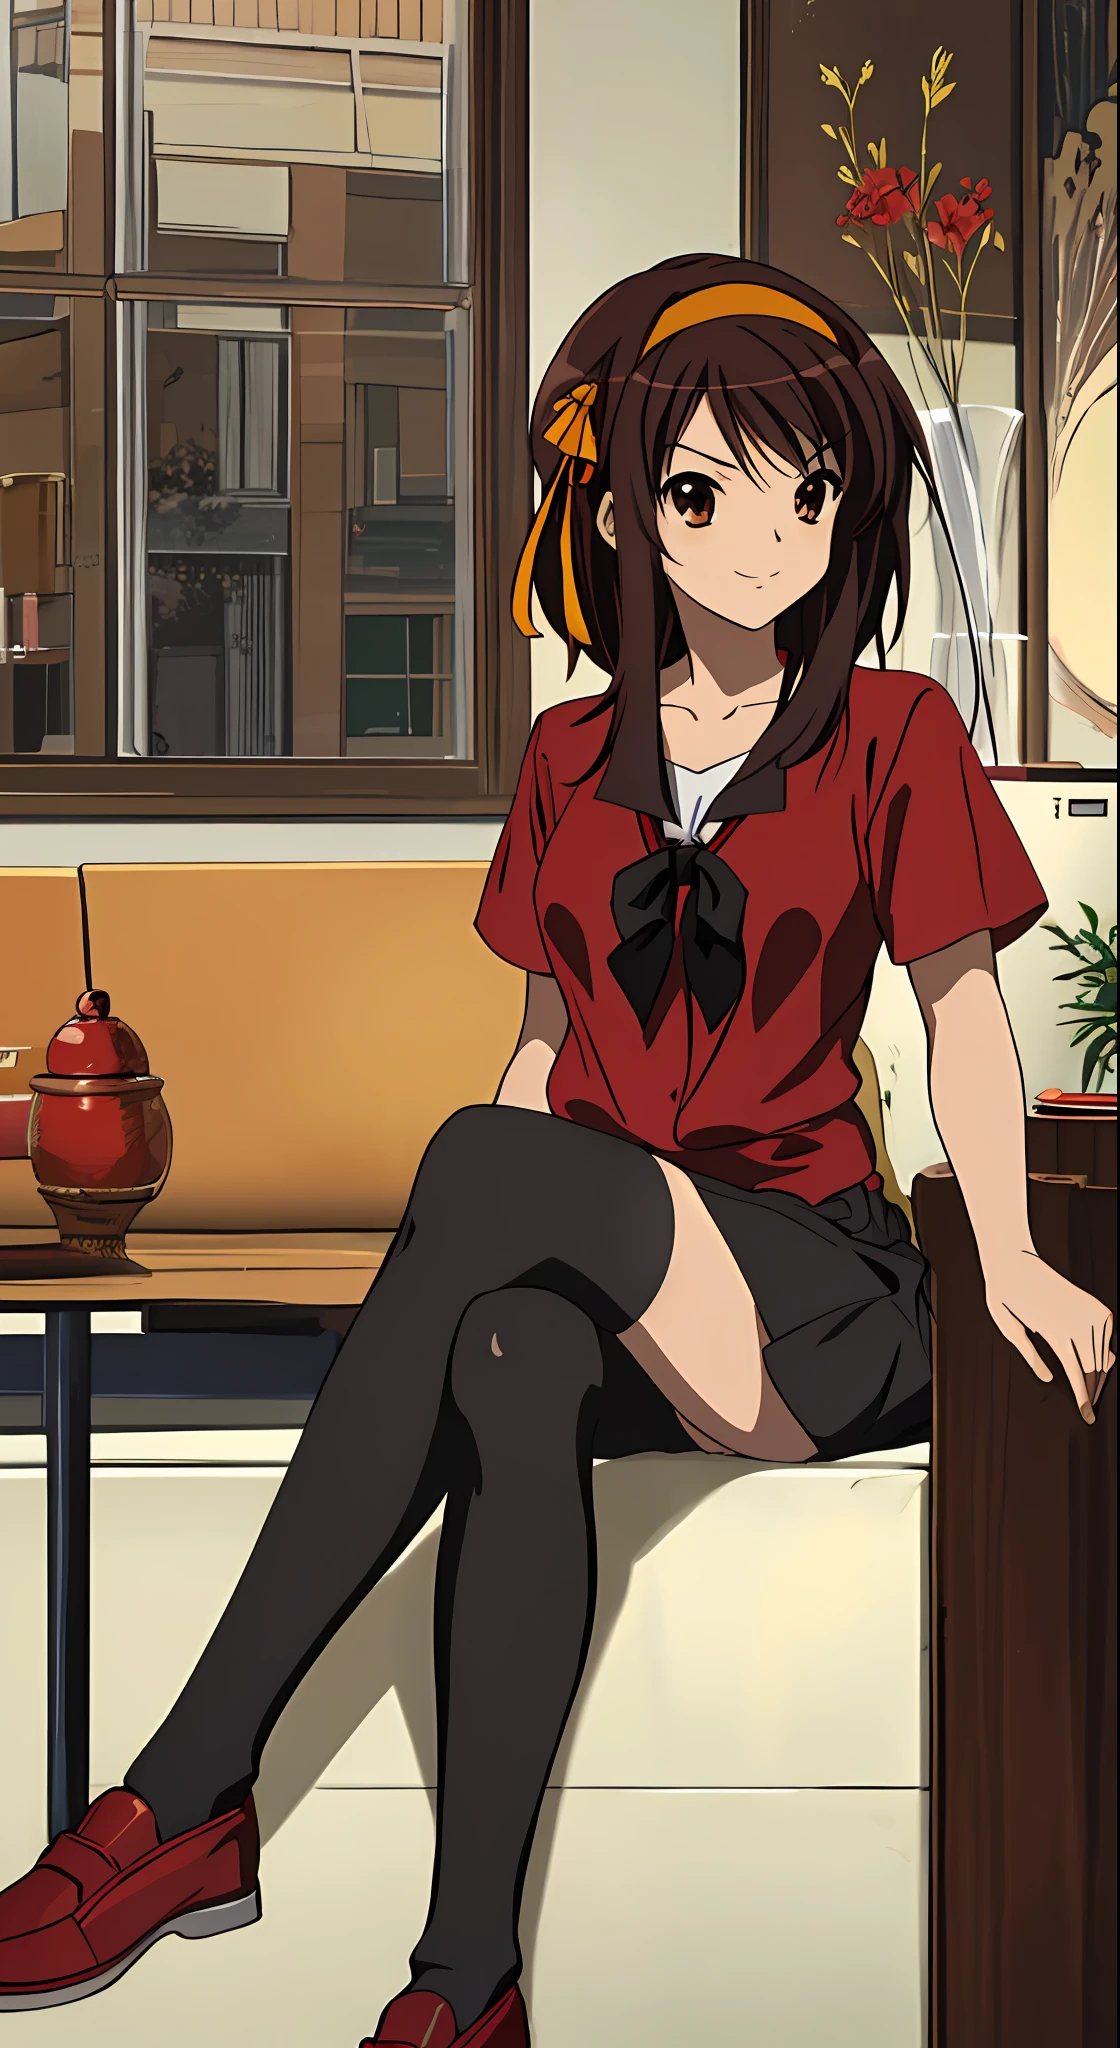 masterpiece, best quality, high definition, 1girl, solo, one, superhero, ((shirt, red shirt, black tie, red shirt with black tie: 1.2)), stockings, brown hair, short hair, brown eyes, hair headband, medium hair, ribbon, shoes, matching shoes, medium chest, sitting, smiling, in the room, Haruhi Suzumiya, Kyoi Haruhi style, autumn, winter, cloudy, very detailed face